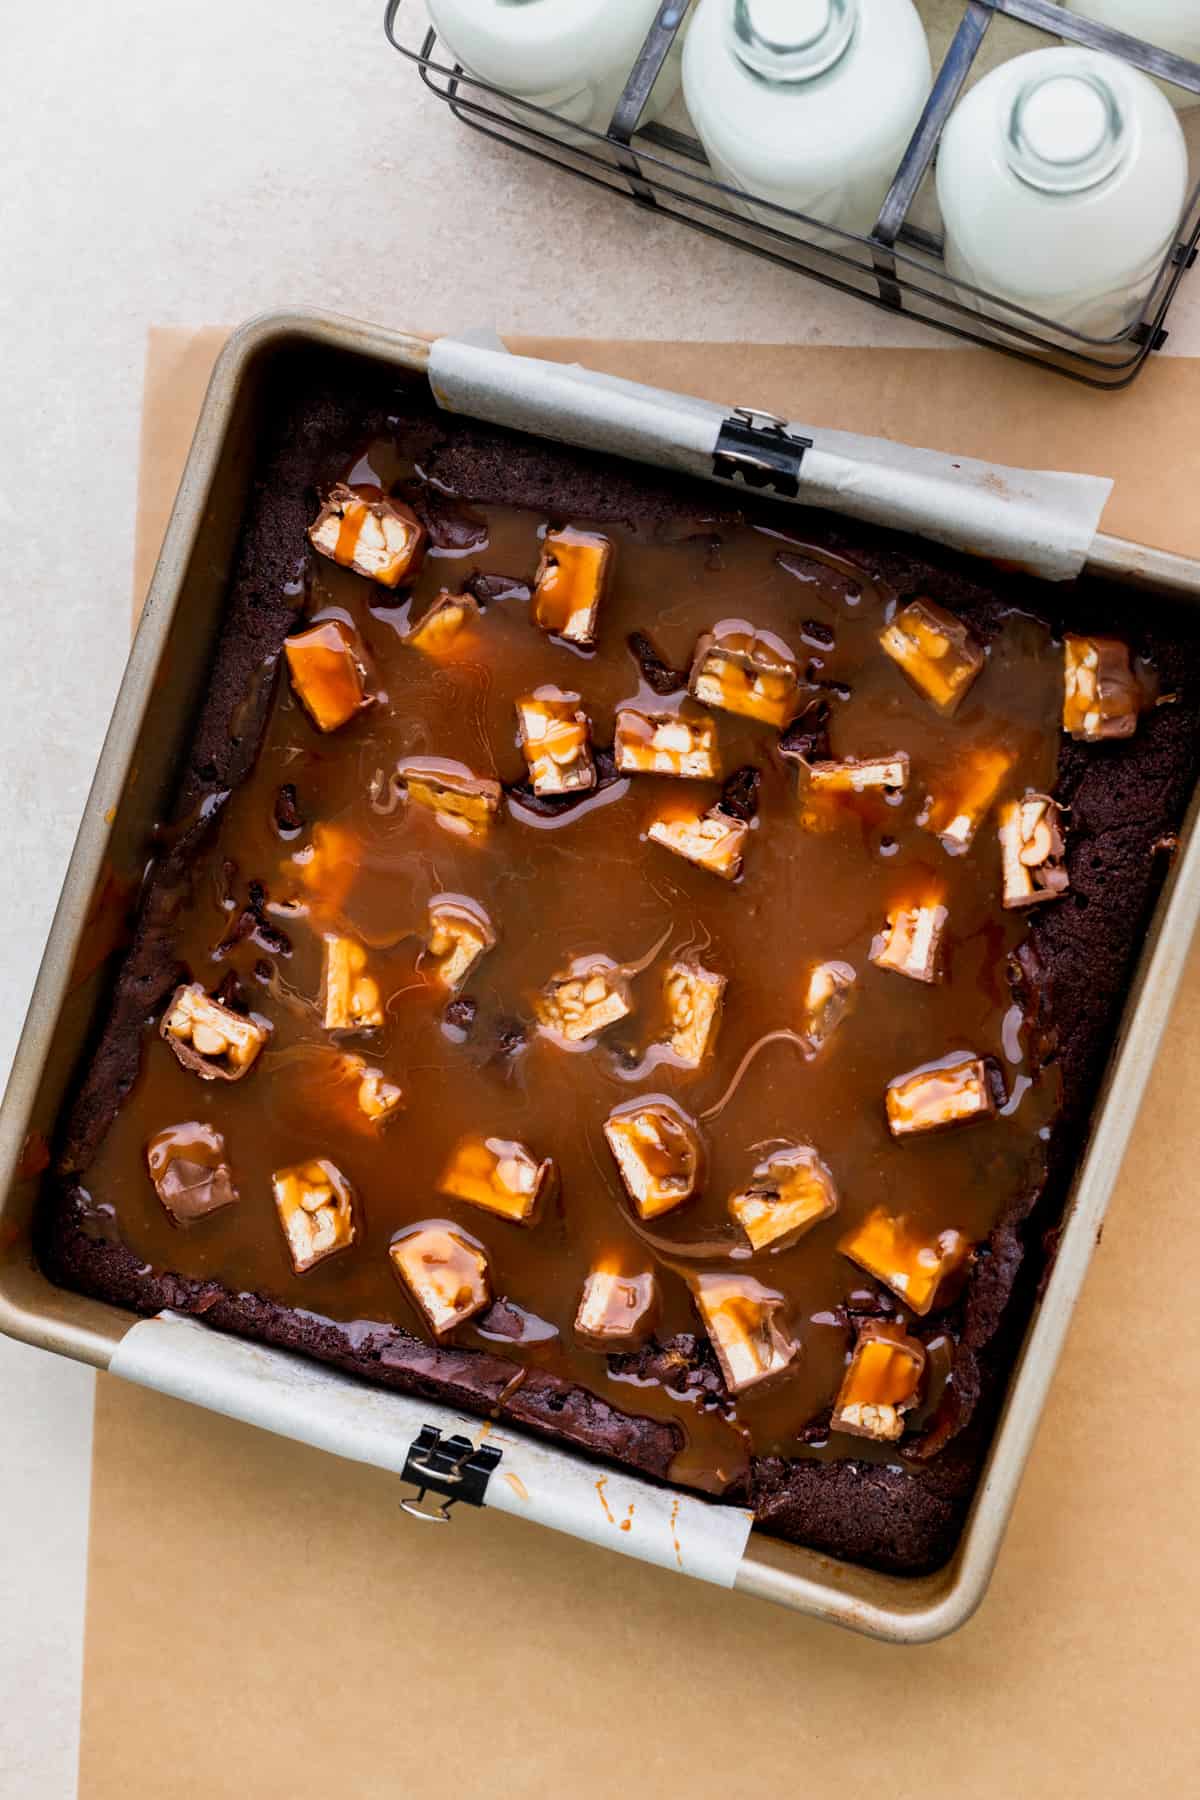 Baked brownies with caramel on top in the pan.